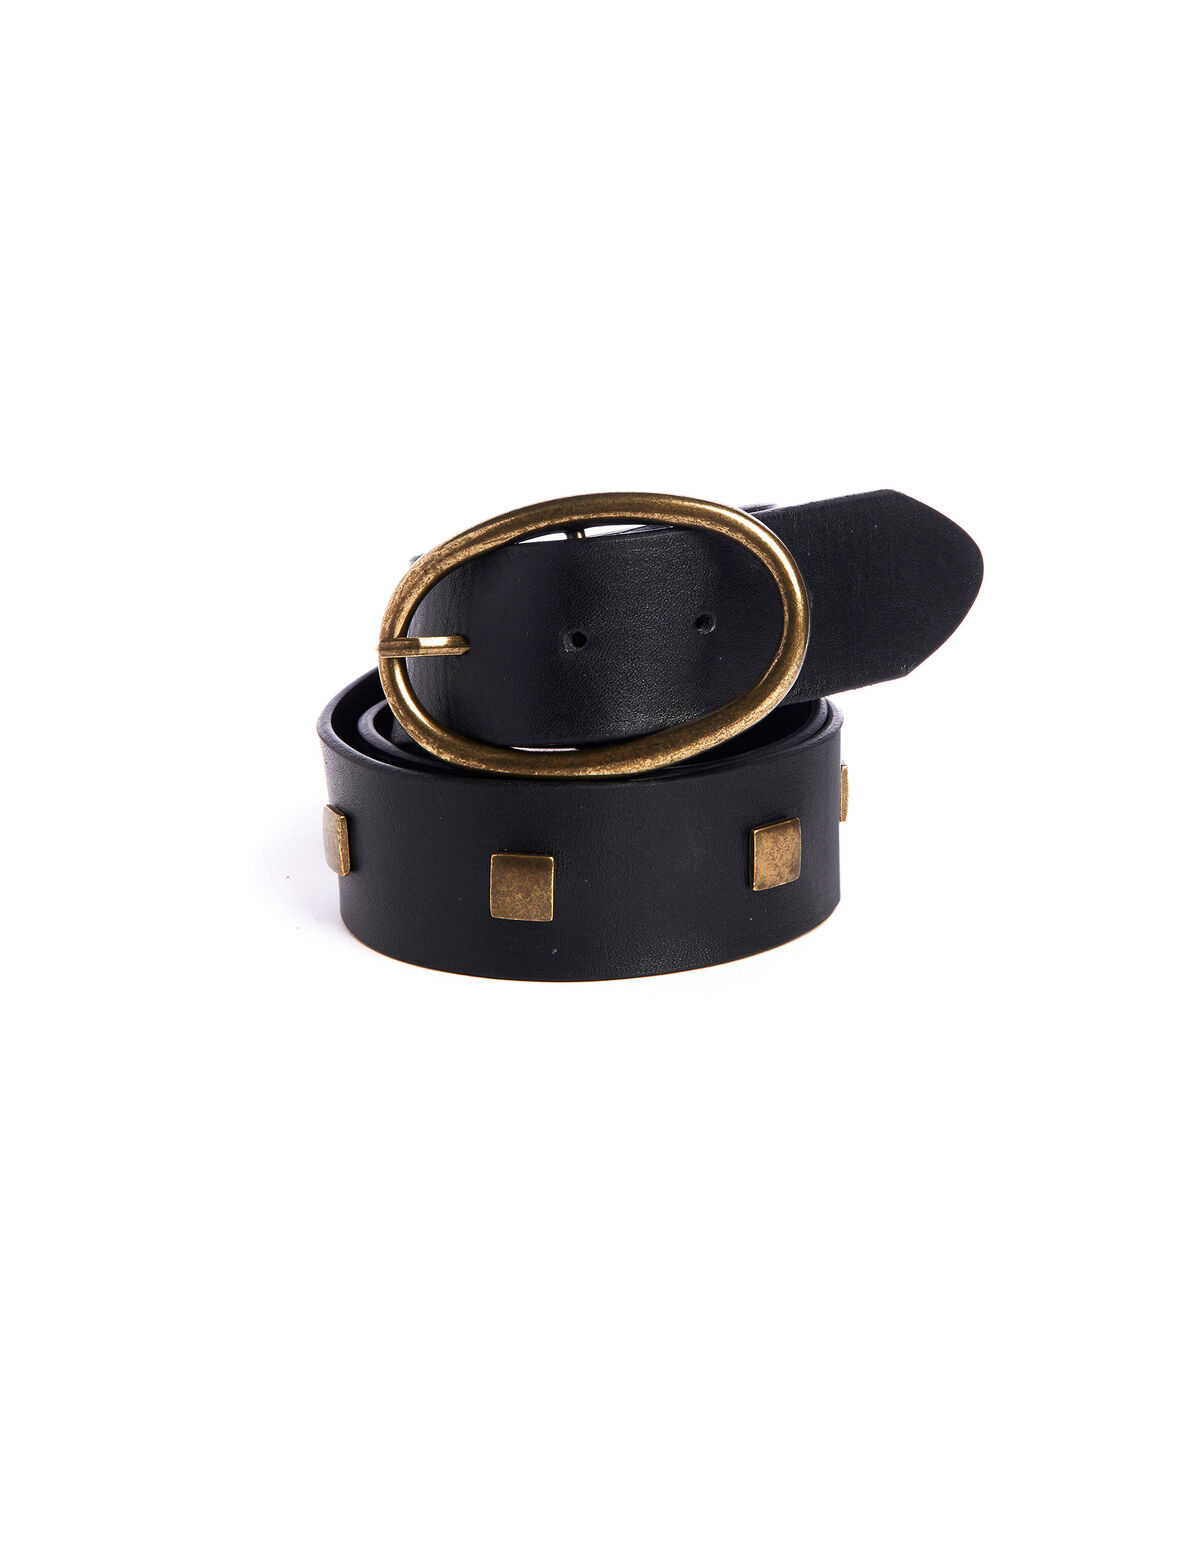 Black leather square studs belt gold buckle - View all - Nícoli